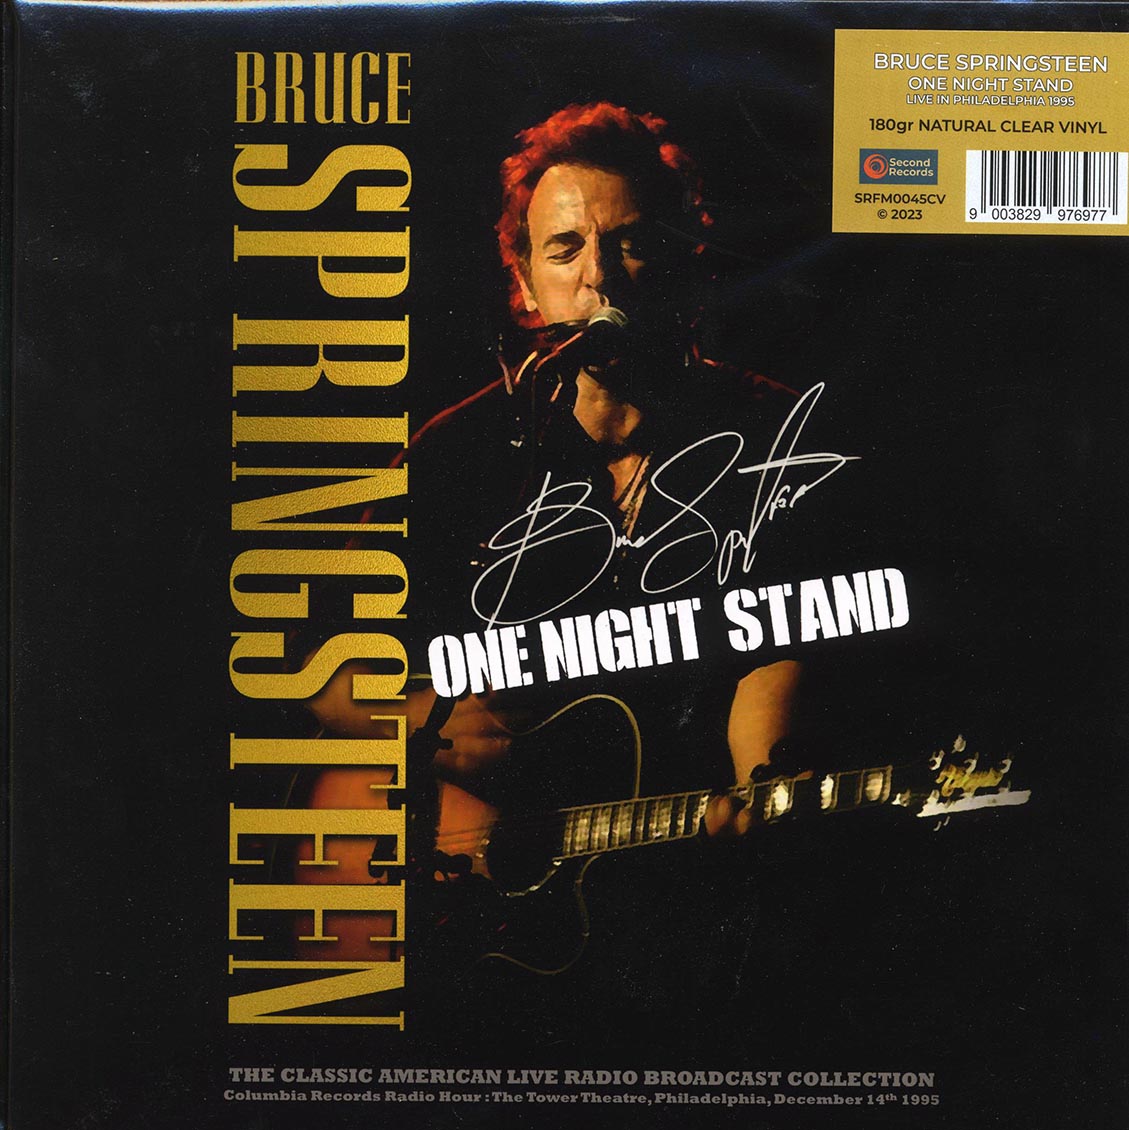 Bruce Springsteen - One Night Stand: Columbia Records Radio Hour, The Tower Theater Philadelphia, December 14th 1995 (180g) (clear vinyl) - Vinyl LP